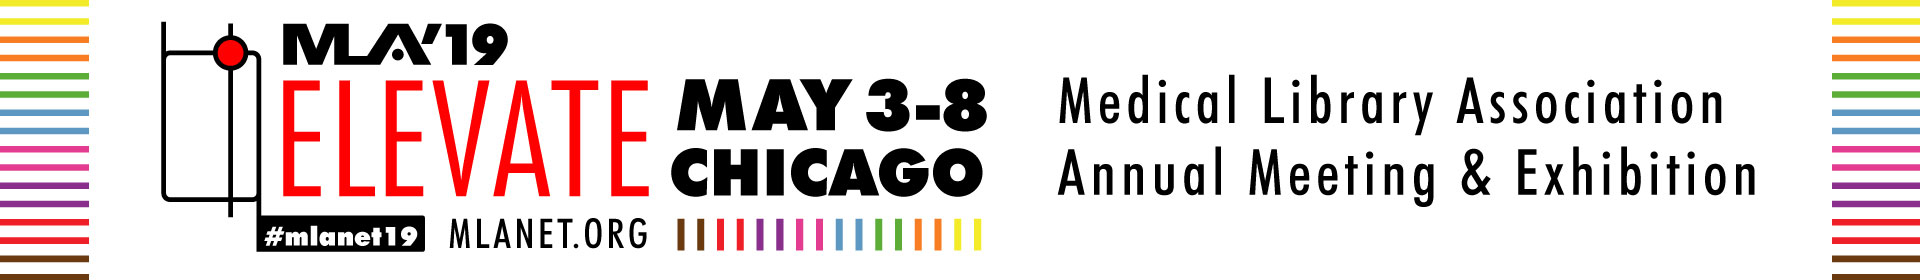 MLA 2019 Annual Meeting Event Banner